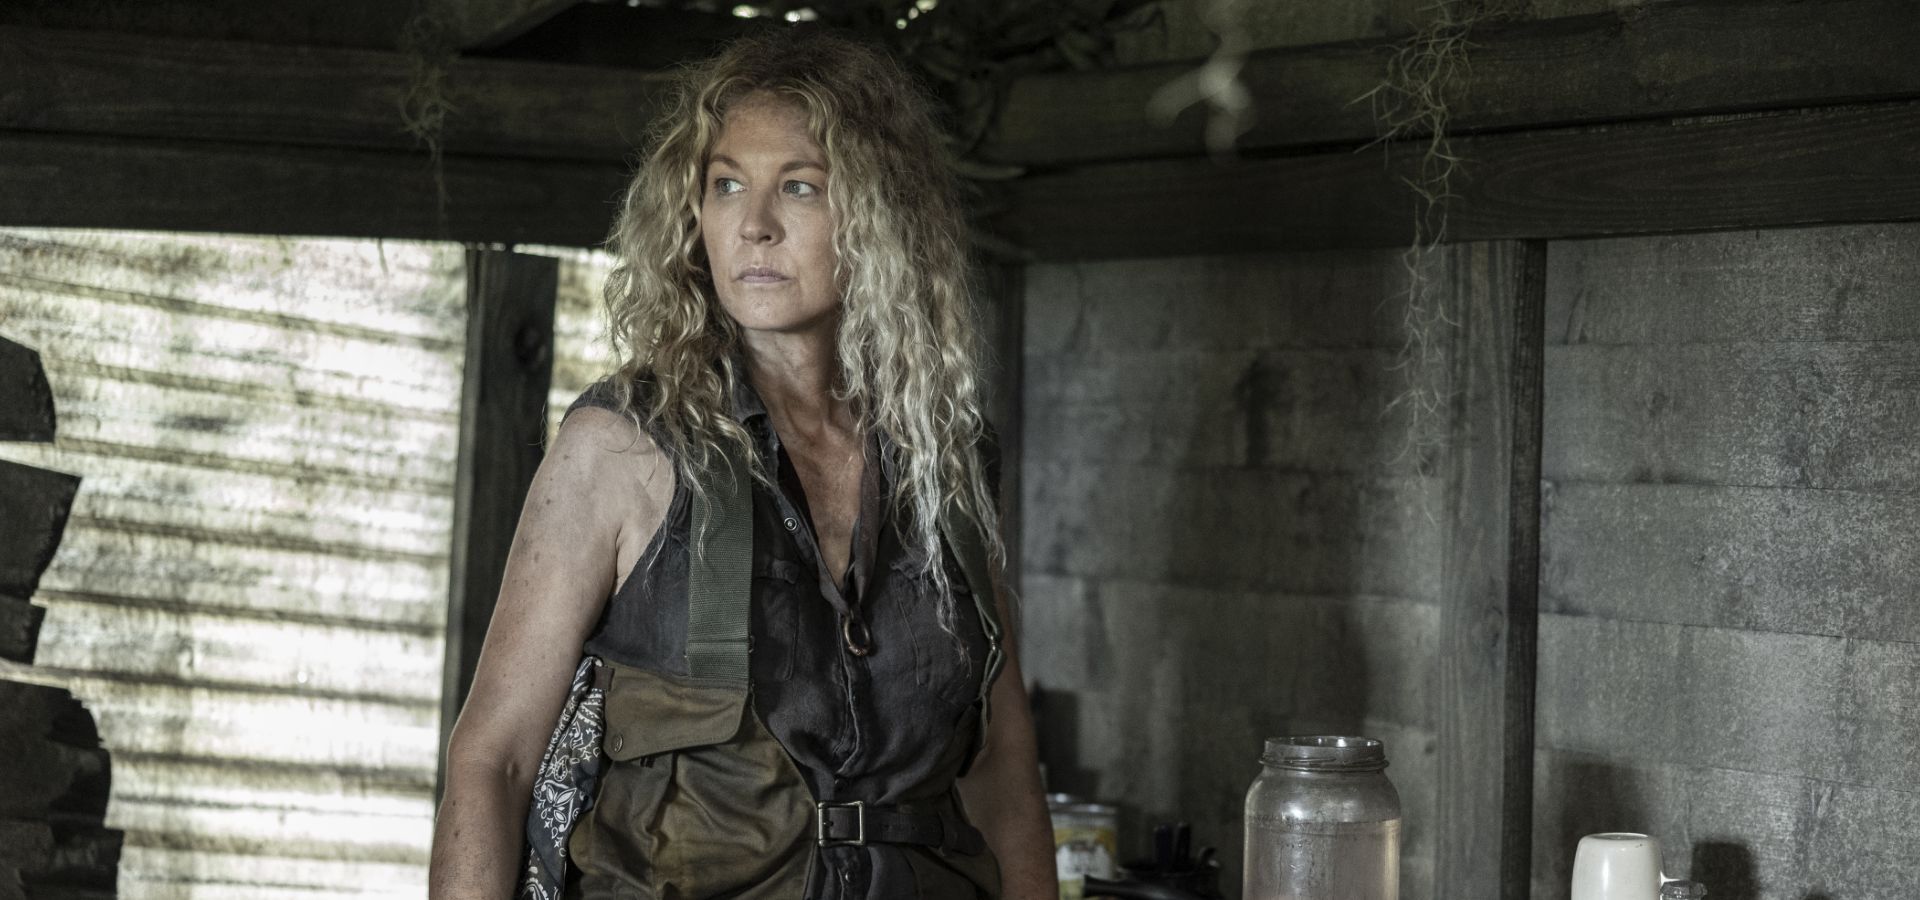 Fear the Walking Dead Q&A — Jenna Elfman on A Traumatized June Fighting Back Against PADRE